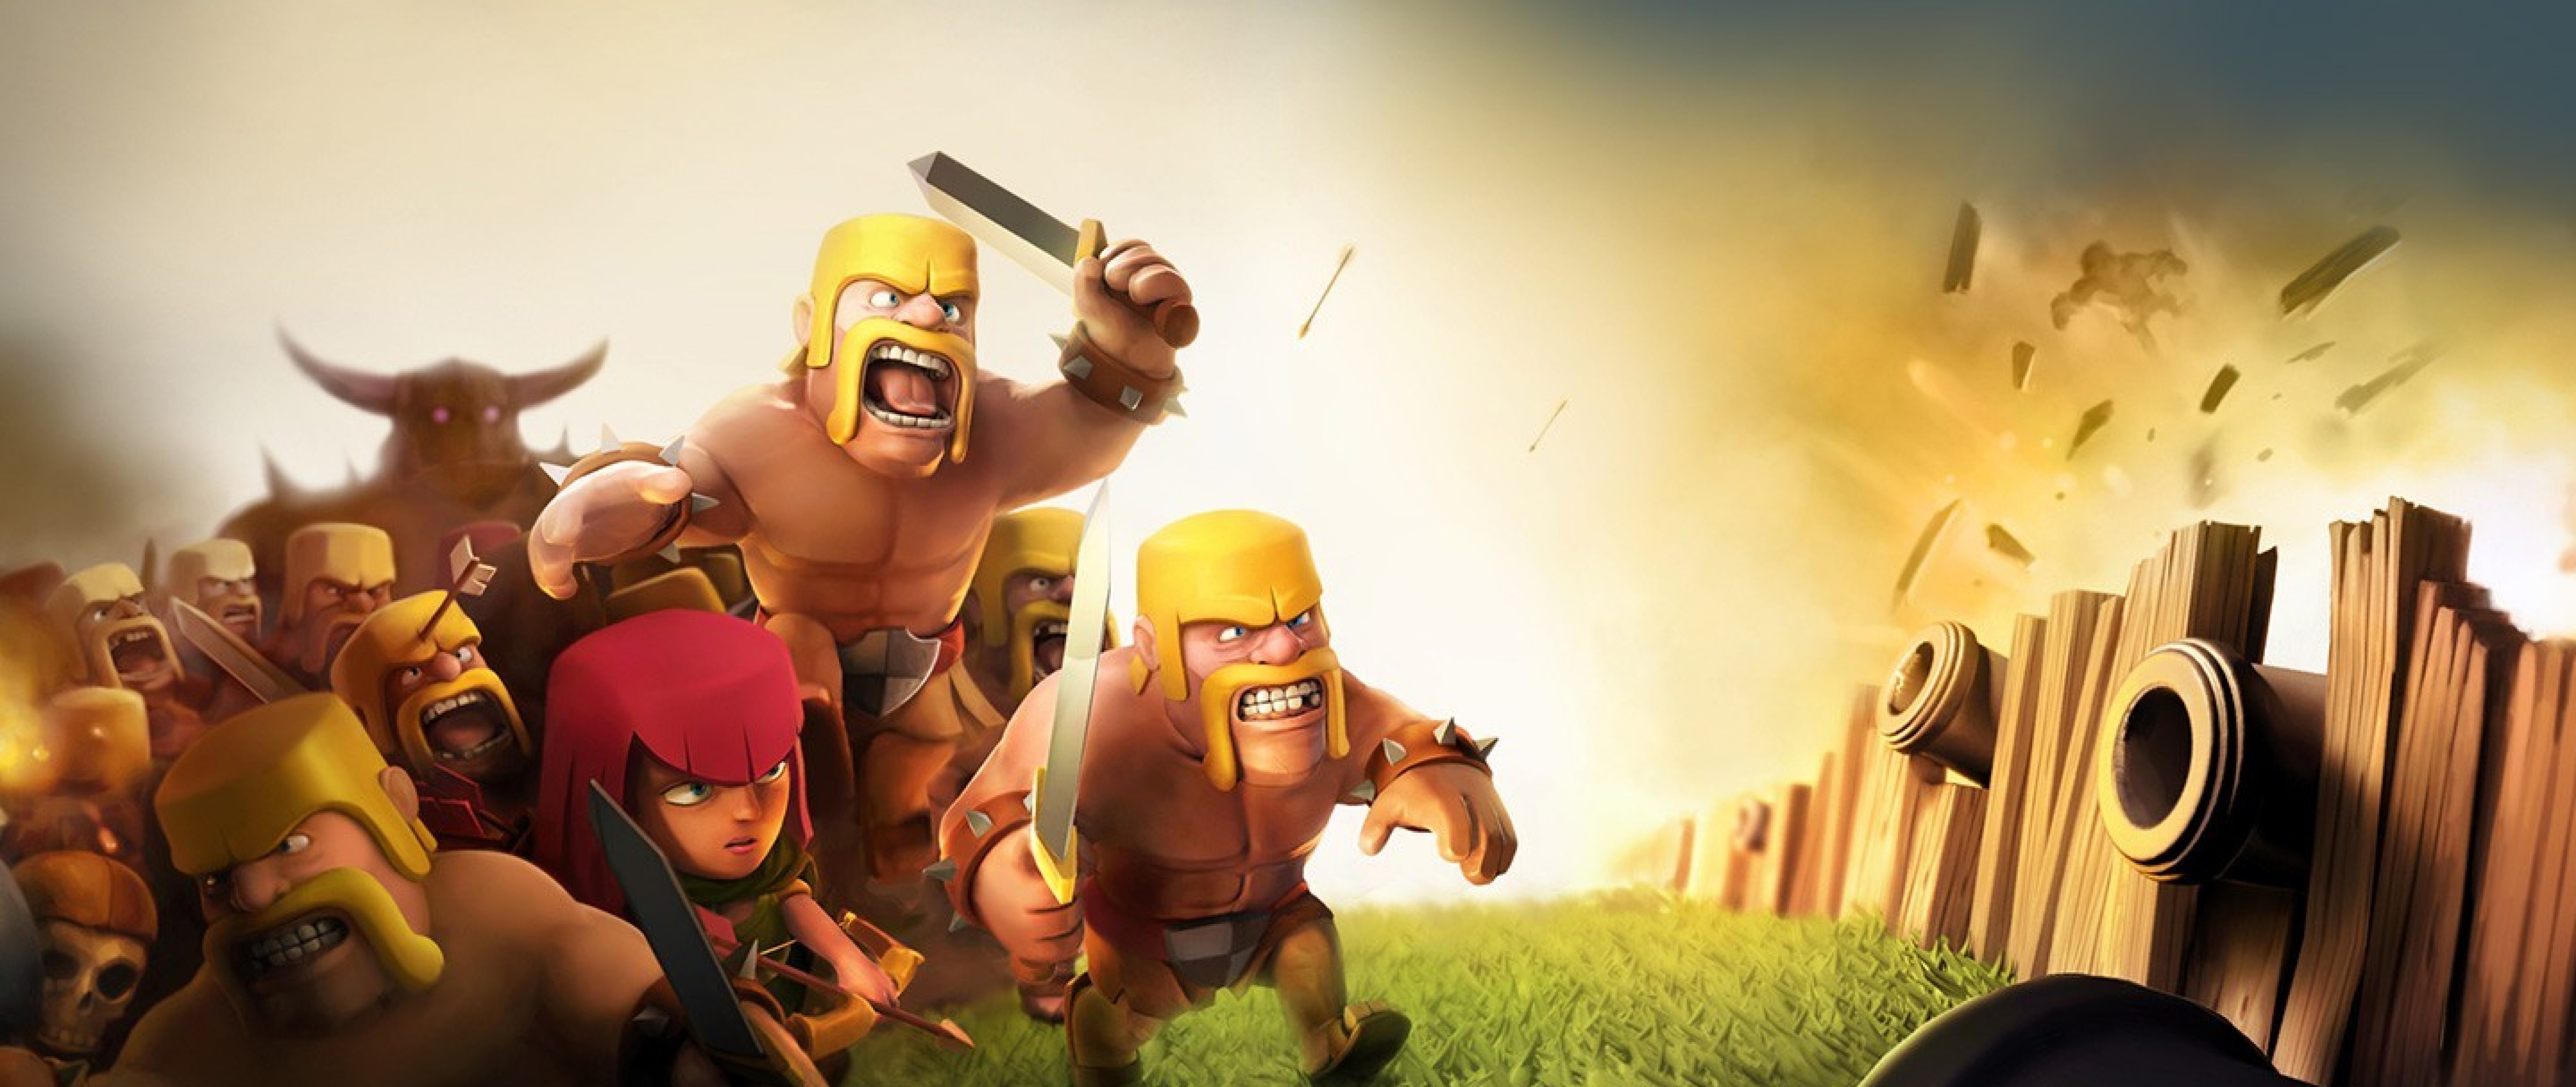 Clash Of Clans Coc Wizard 3d Wallpaper For Desktop And Mobiles 4k Ultra